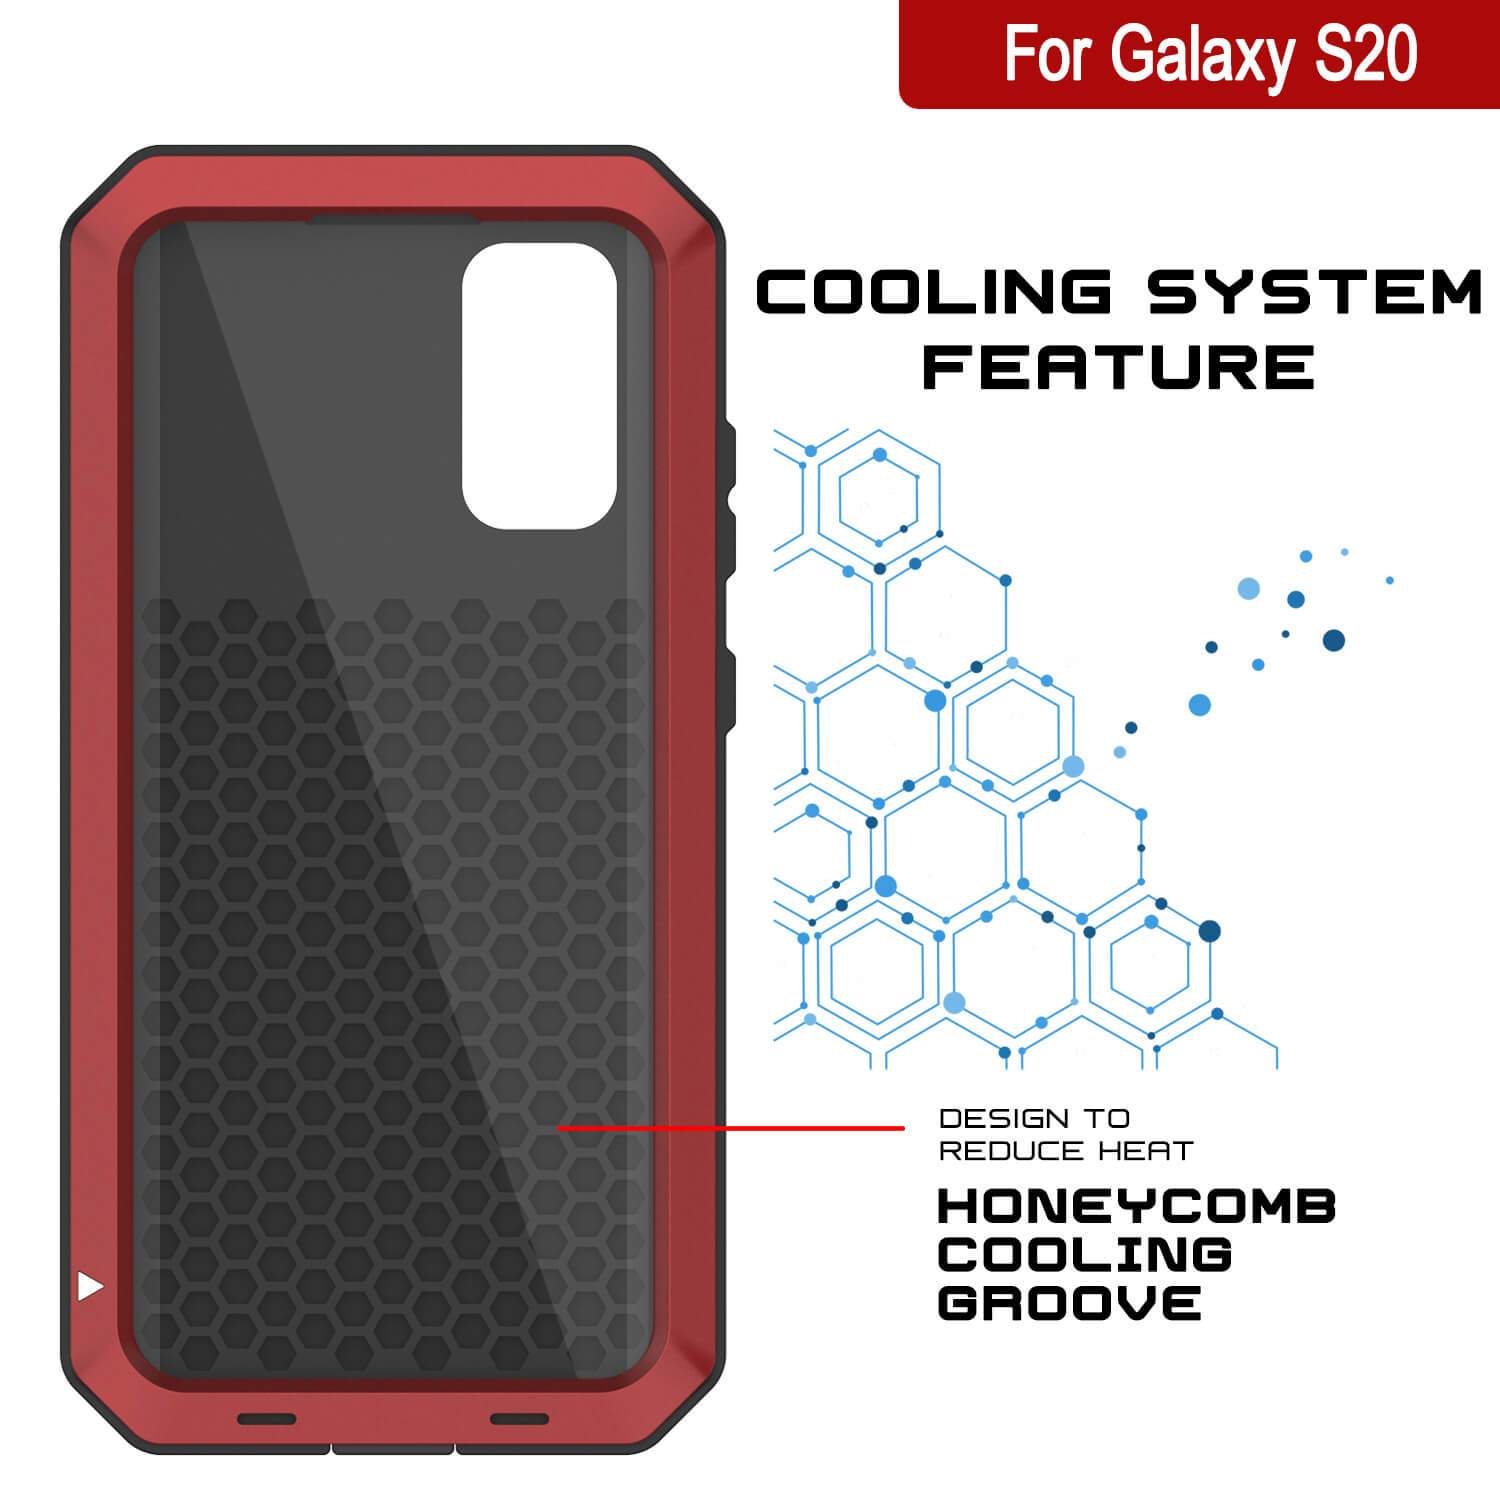 Galaxy s20 Metal Case, Heavy Duty Military Grade Rugged Armor Cover [Red]